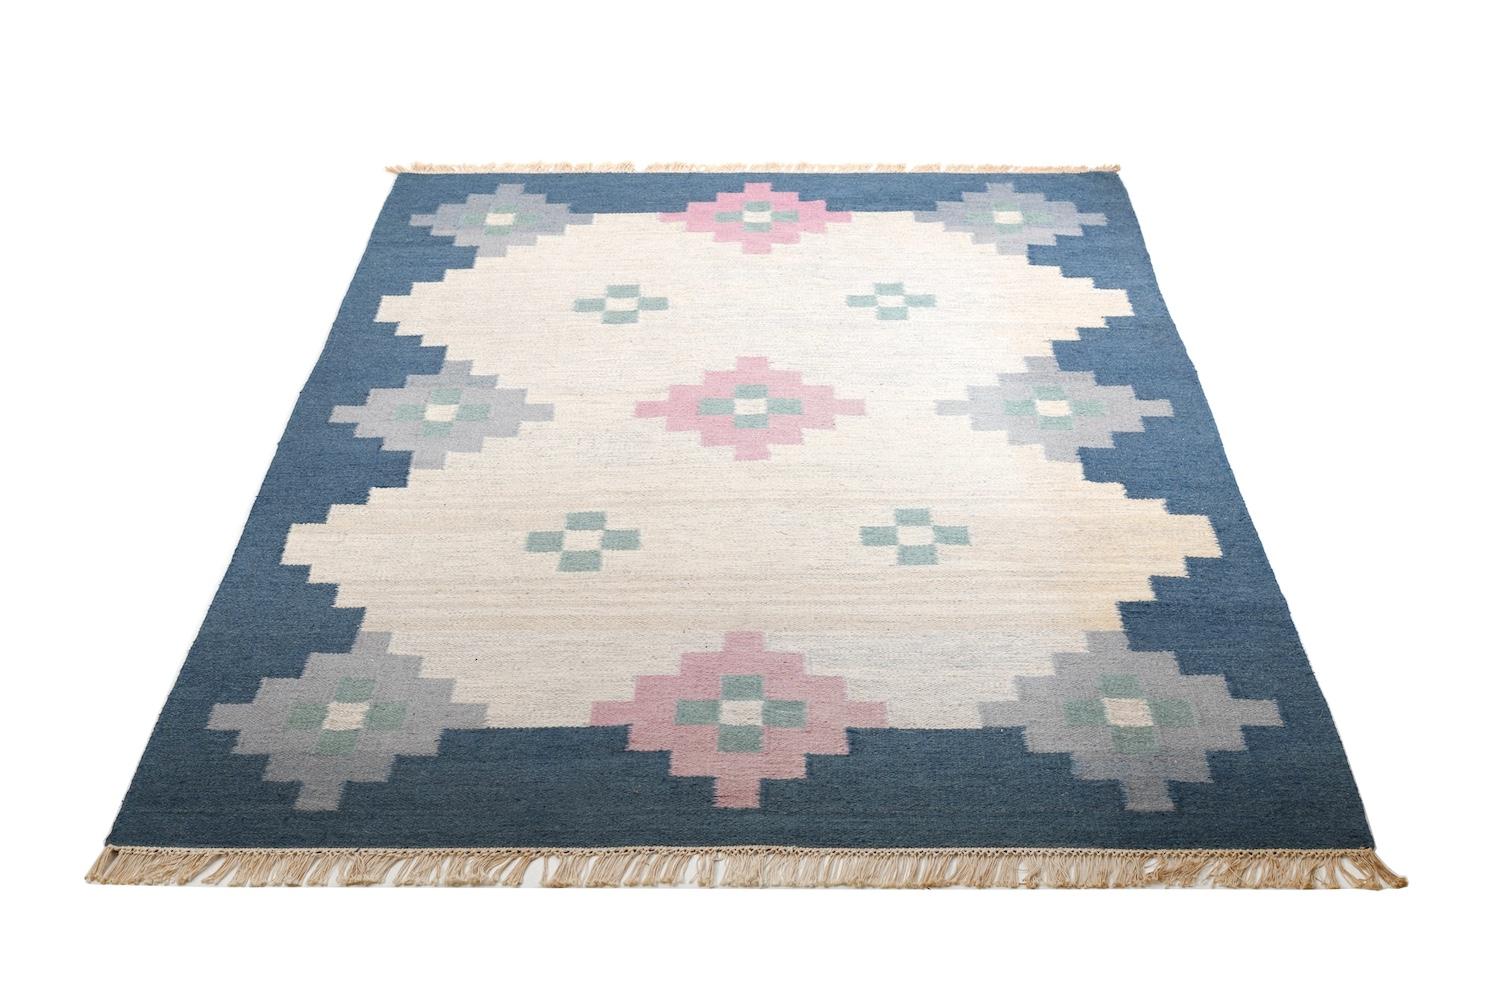 Danish vintage wool carpet 1960s / 1970s. In very good condition. Color: creme/ blue and rose. 200 cm x 290 cm